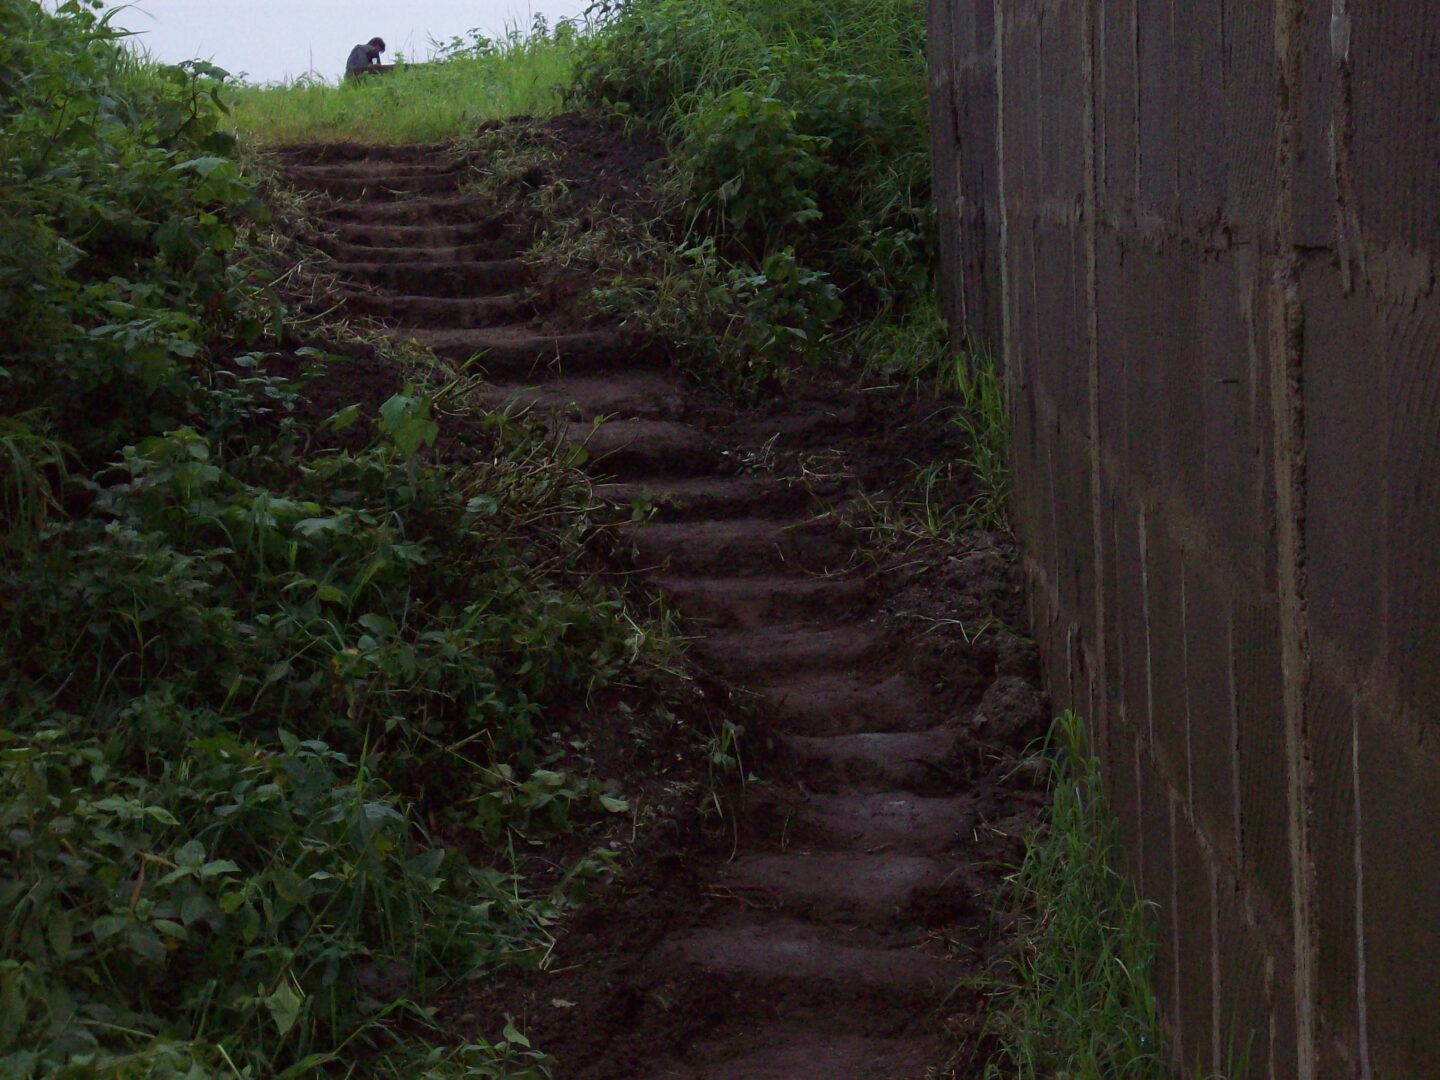 A Stairway Pathway With Plants on Either Sides